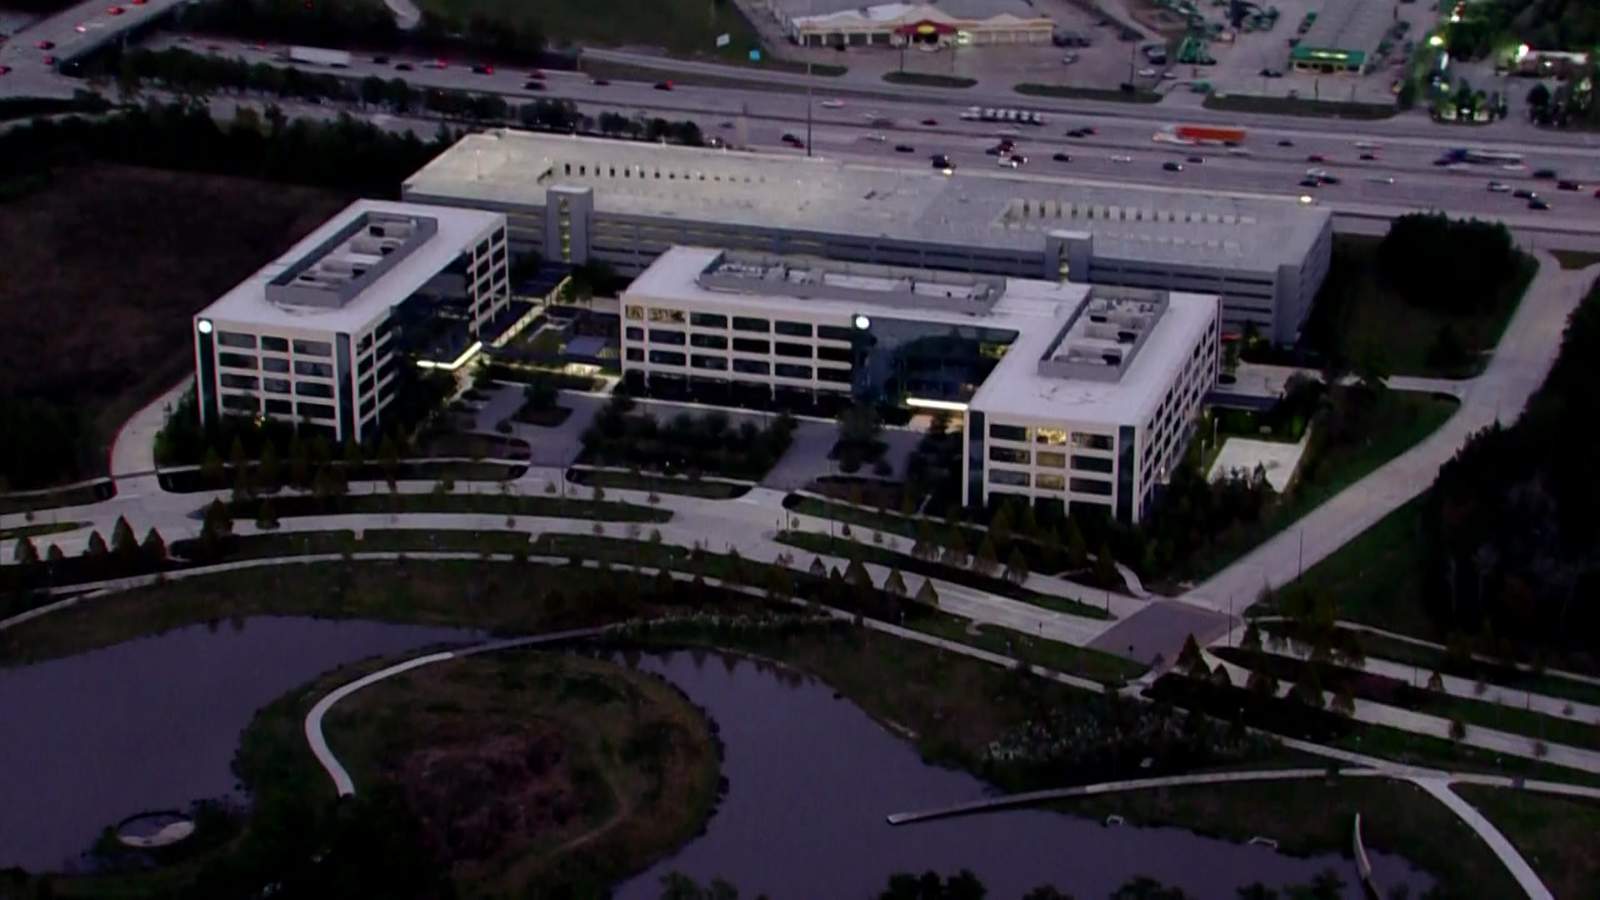 Hewlett Packard headquarters leaving Silicon Valley for ‘state-of-the-art campus’ in Texas